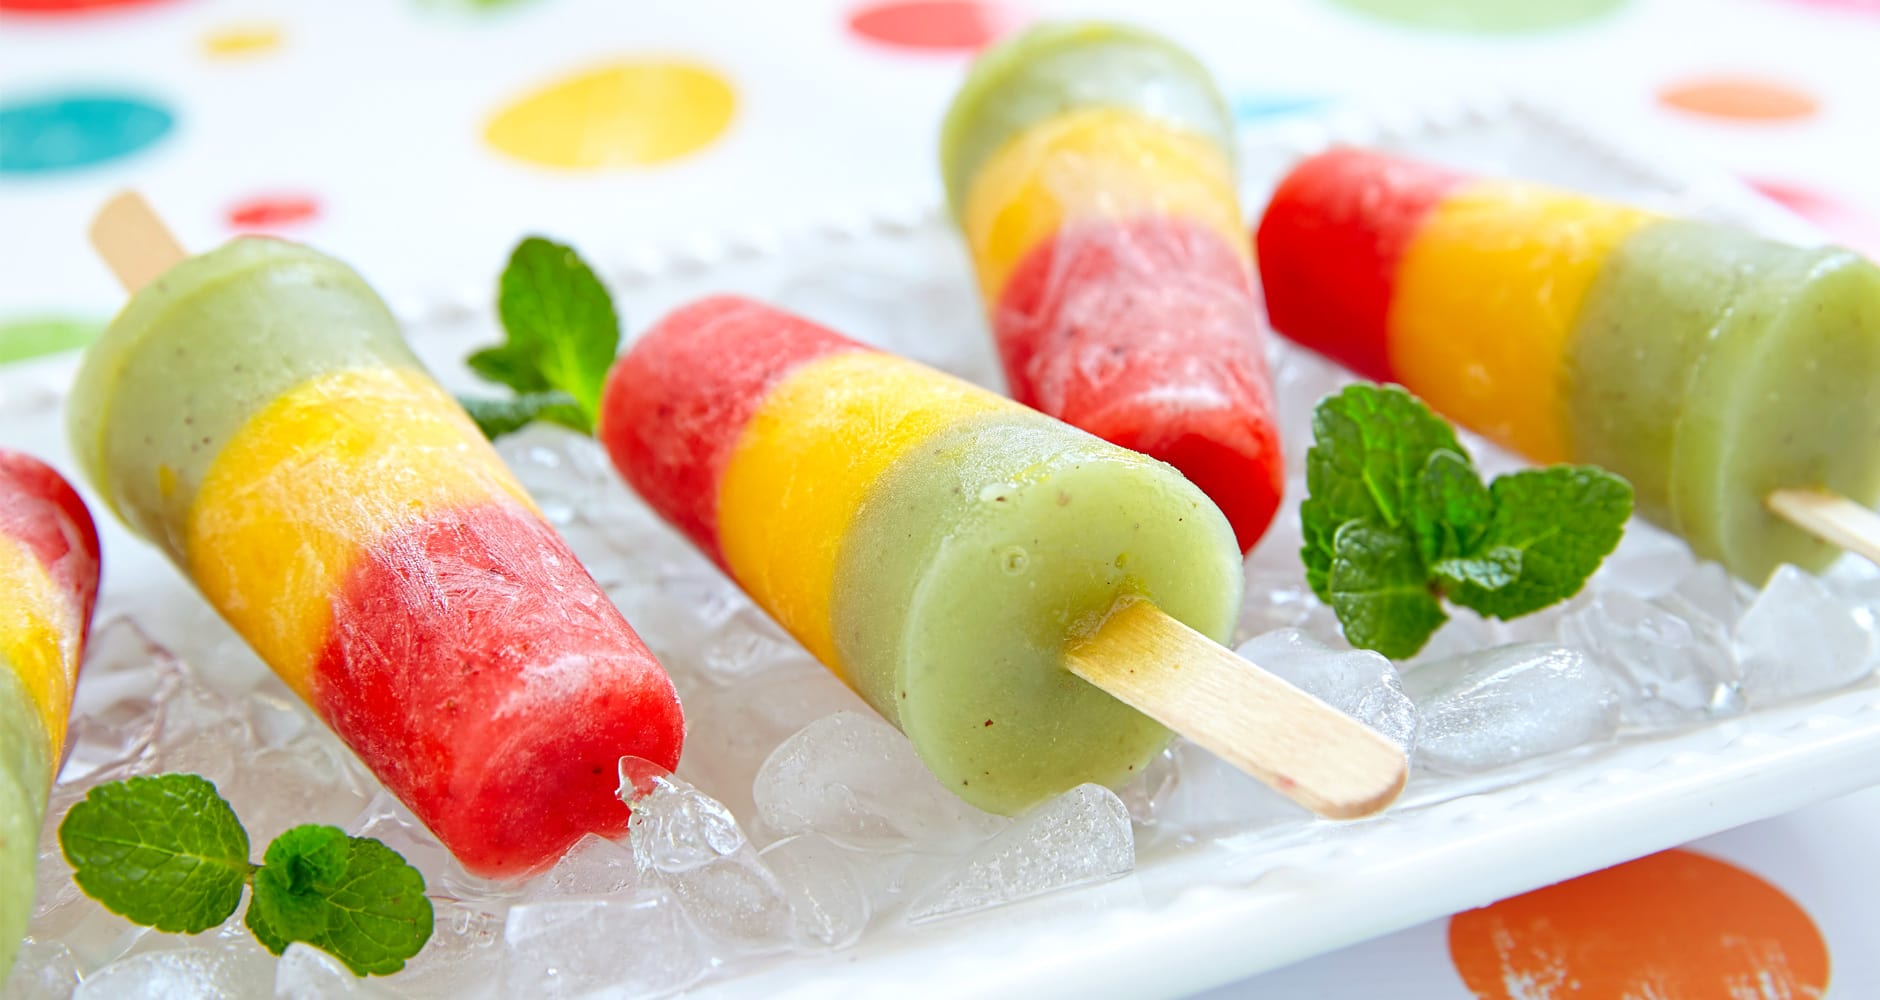 20-ice-pop-nutrition-facts